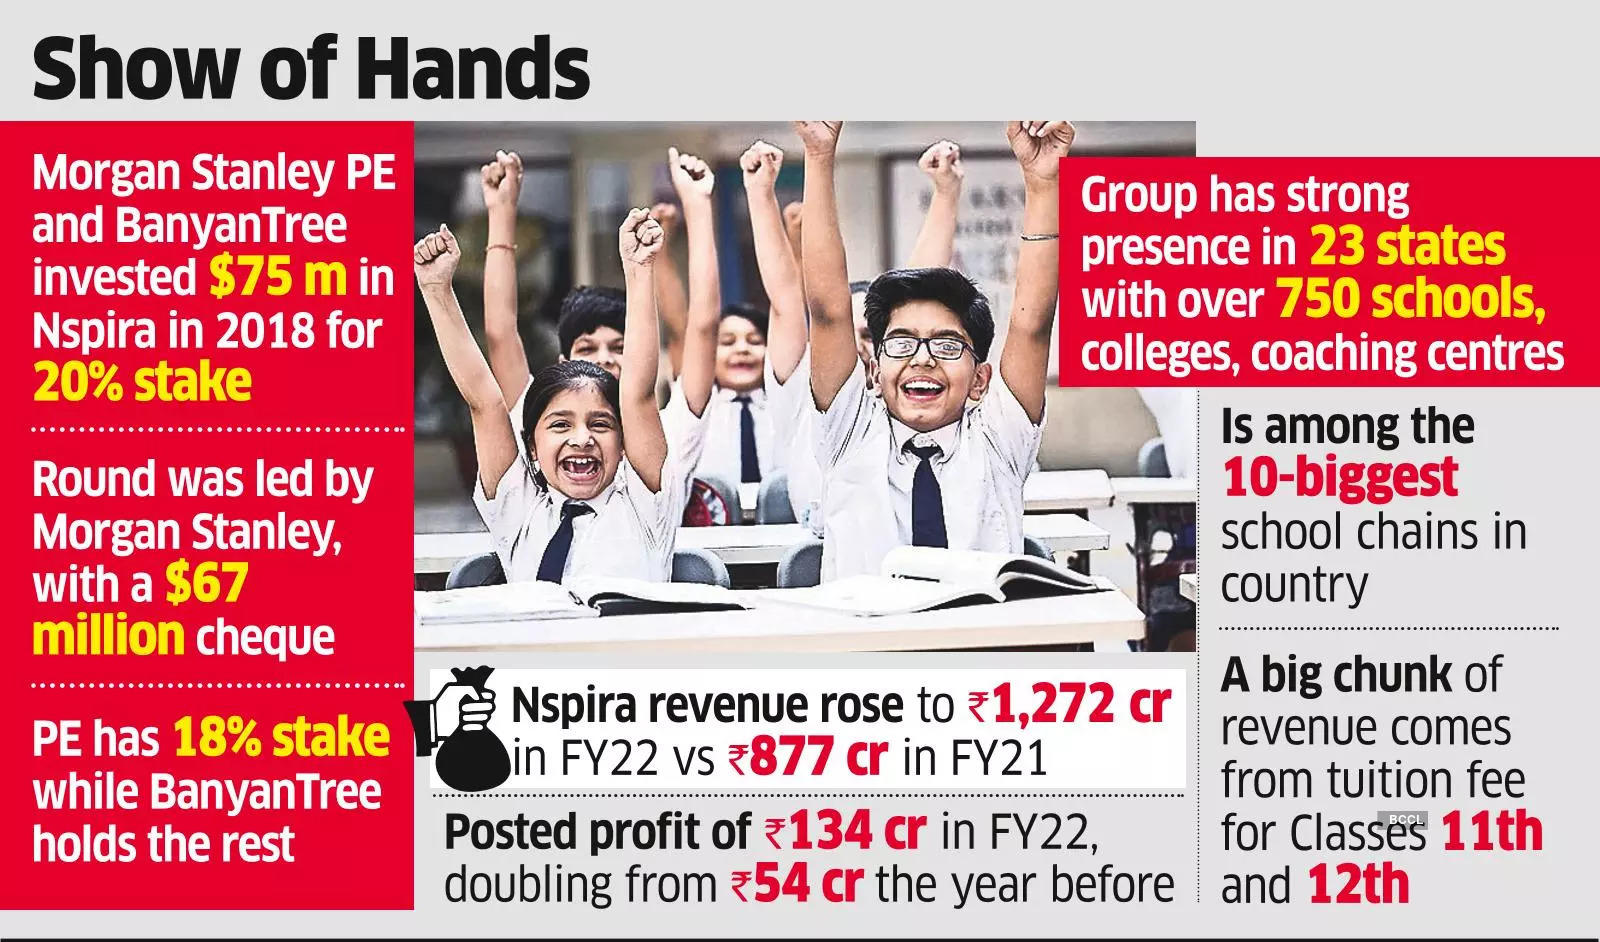 Narayana Set to Buy Out Morgan Stanley,BanyanTree from Group Co for ₹1,400 cr